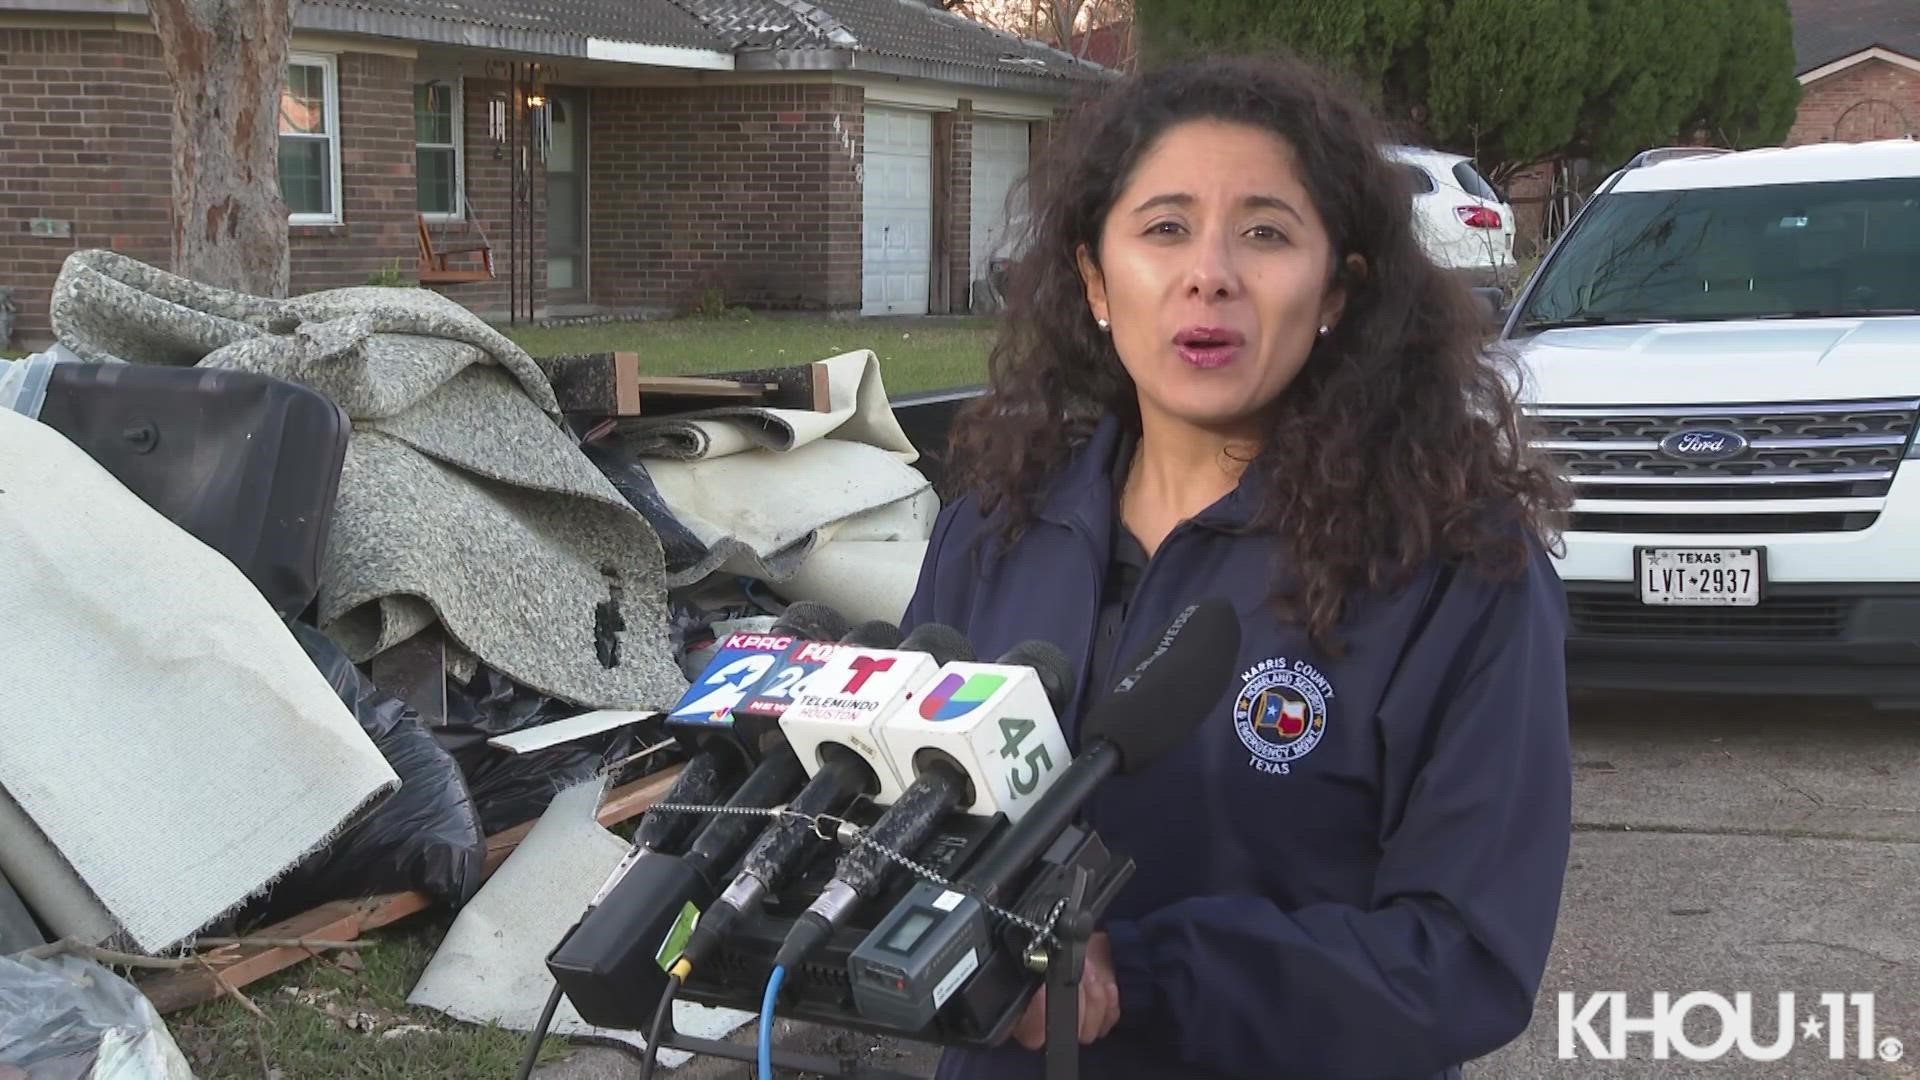 On Wednesday, Judge Lina Hidalgo made her first public comments after severe weather battered Harris County a day prior.